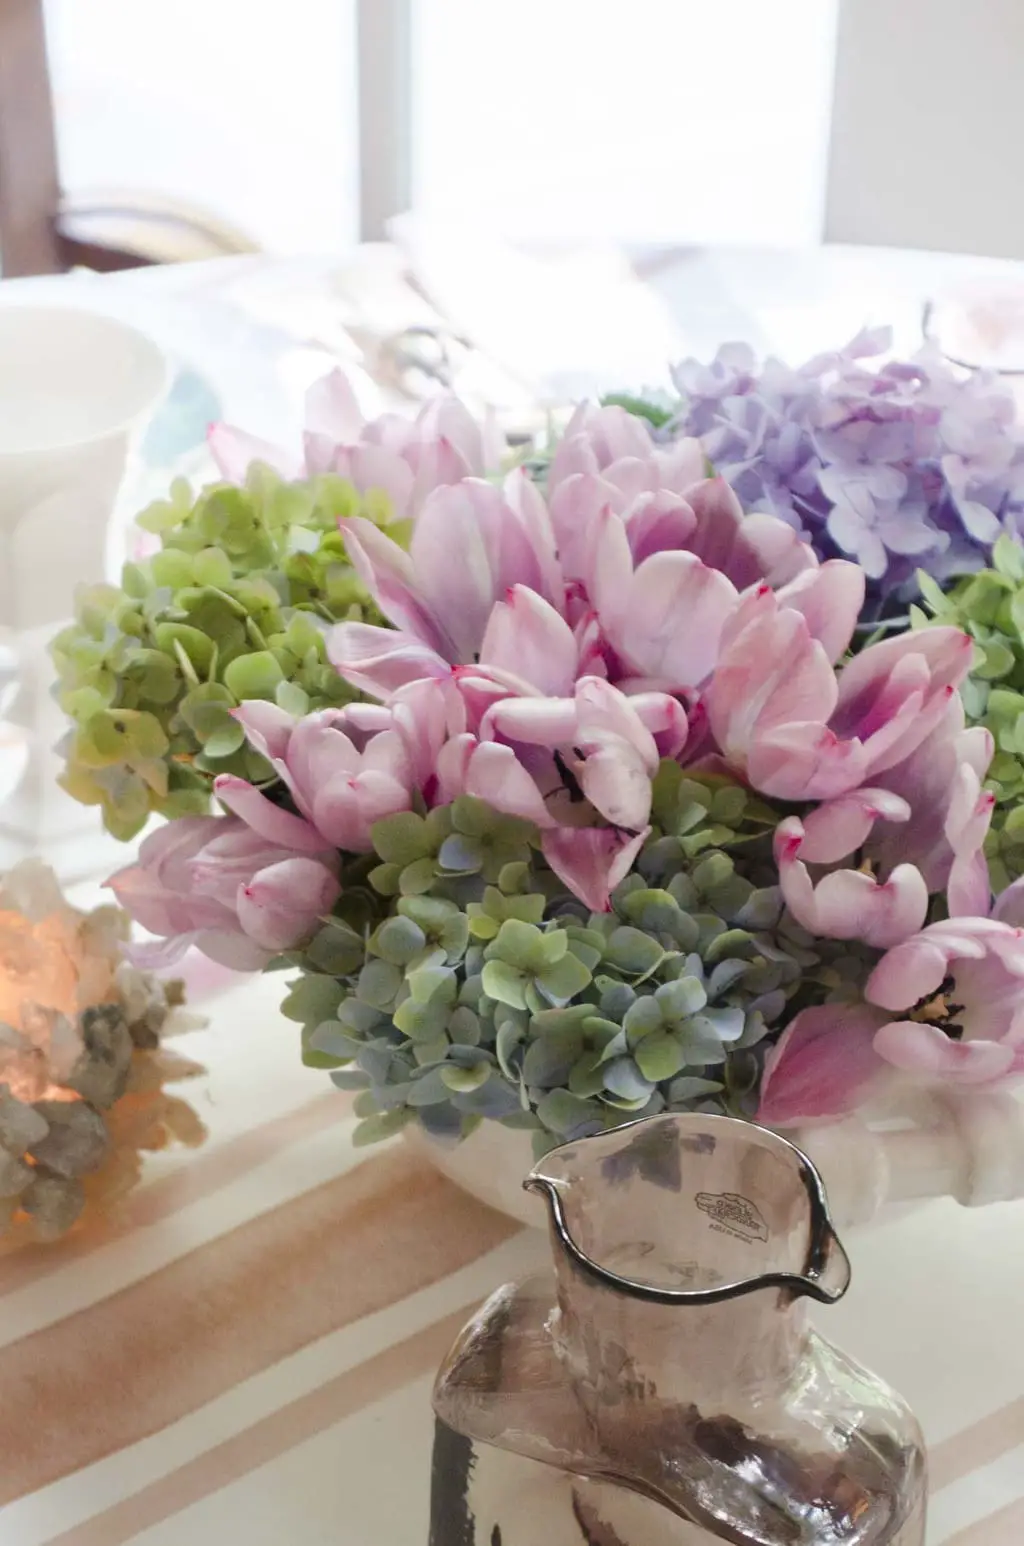 Setting the table with Steve McKenzie, watercolor table setting via @thouswellblog